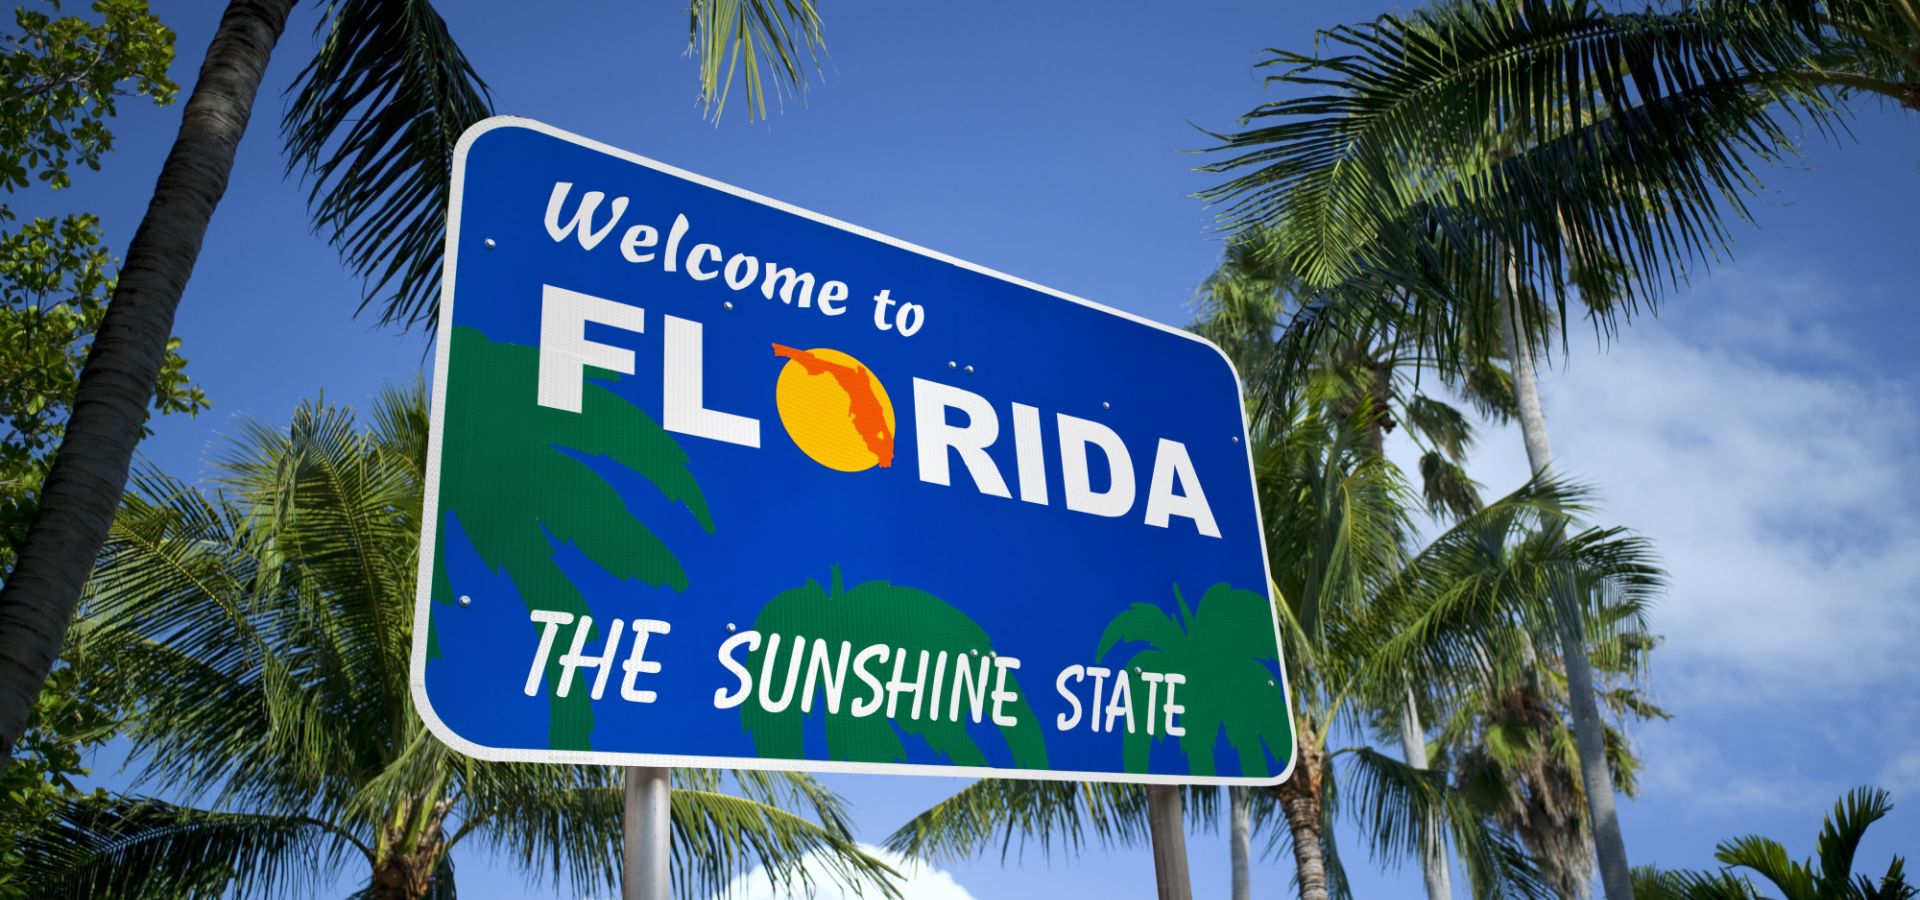 the Sunshine State is seeing an anti-solar movement, financed by big business. "welcome to florida, the sunshine state" sign